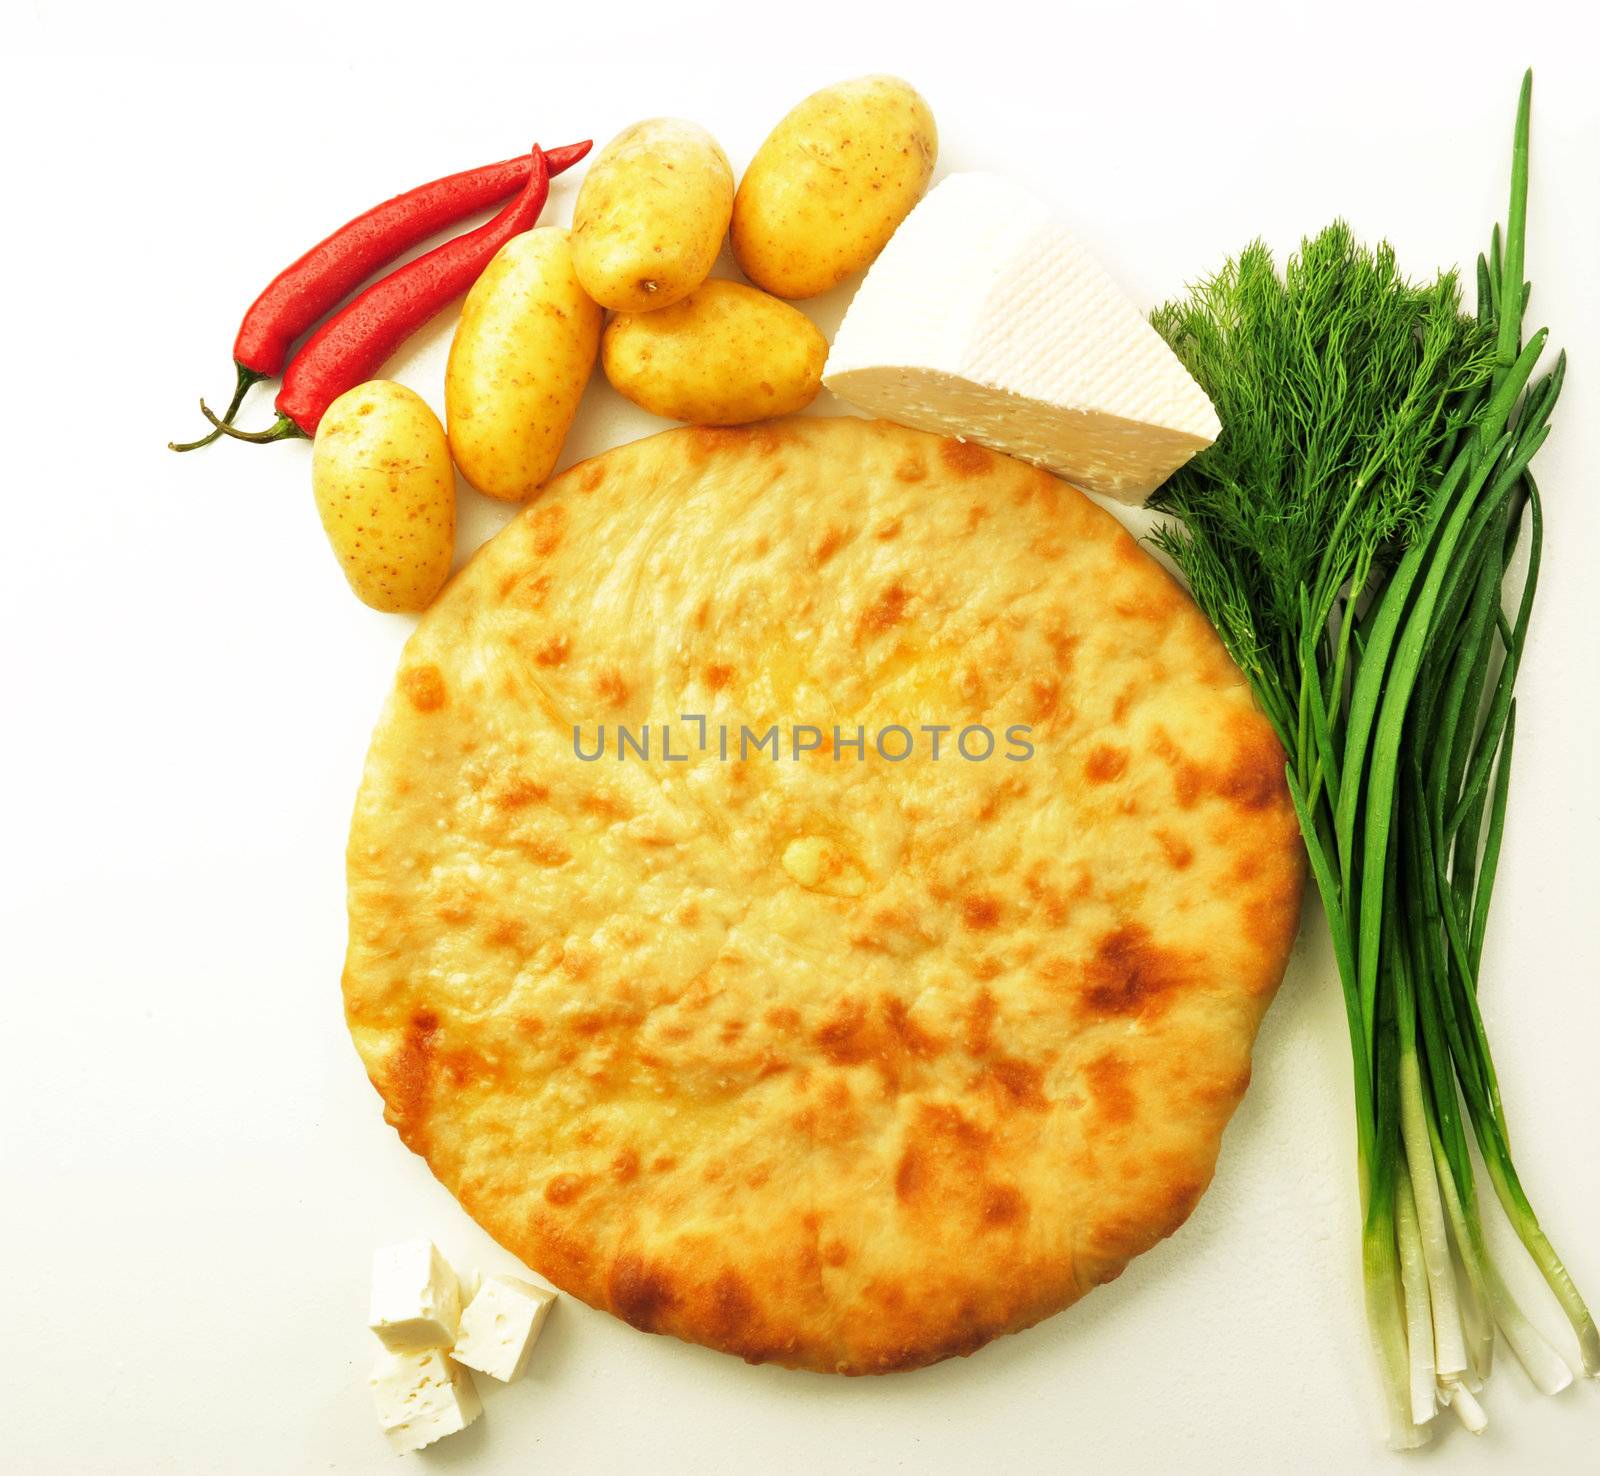  food composition made of flat cake, potato, cayenne, parsley and spring onion